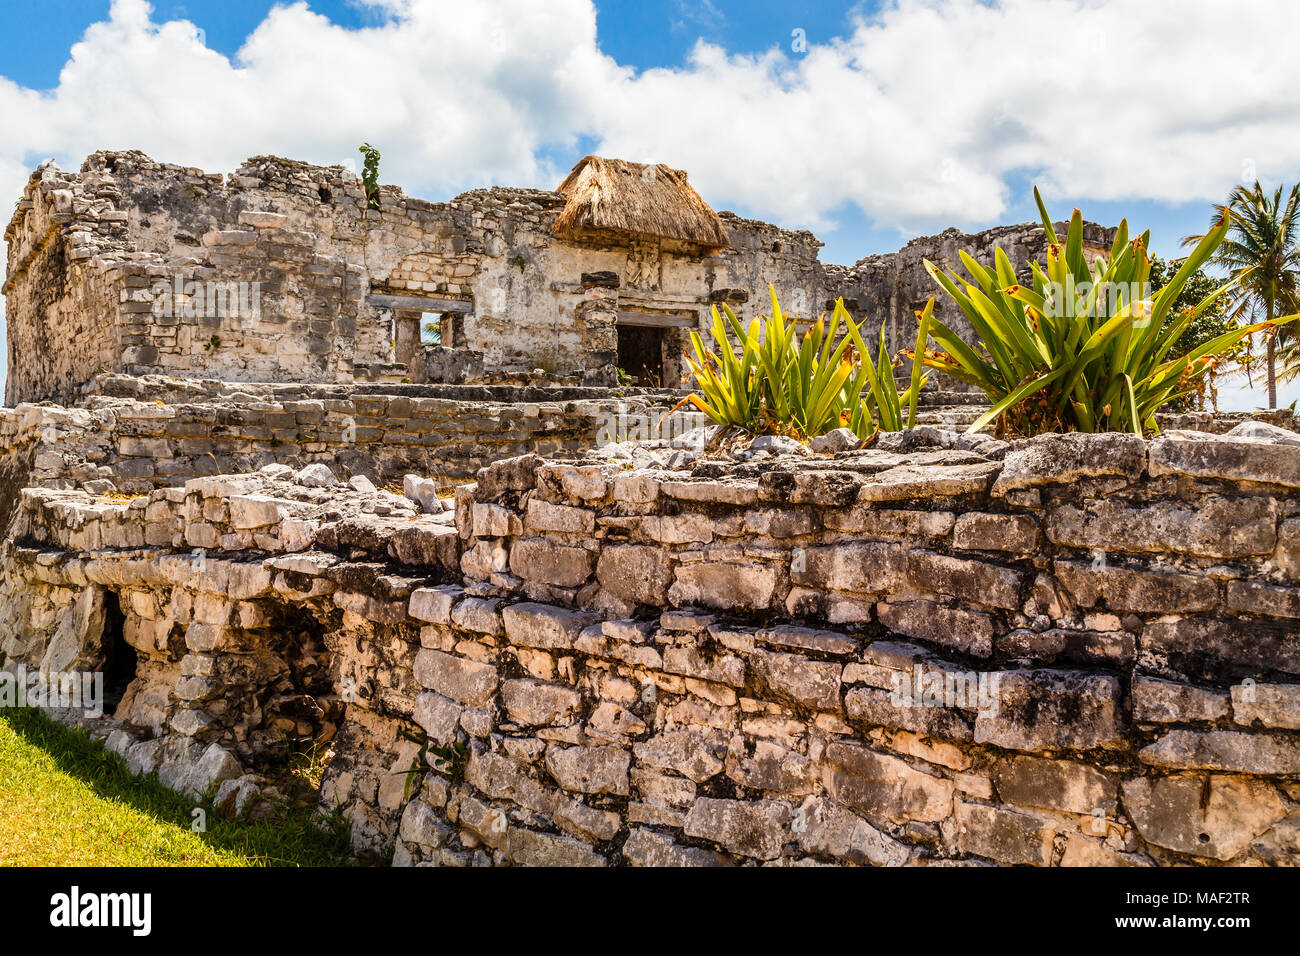 Agave plant on the old ruined wall with ancient Mayan temple in the background, Tulum, Yucatan, Mexico Stock Photo